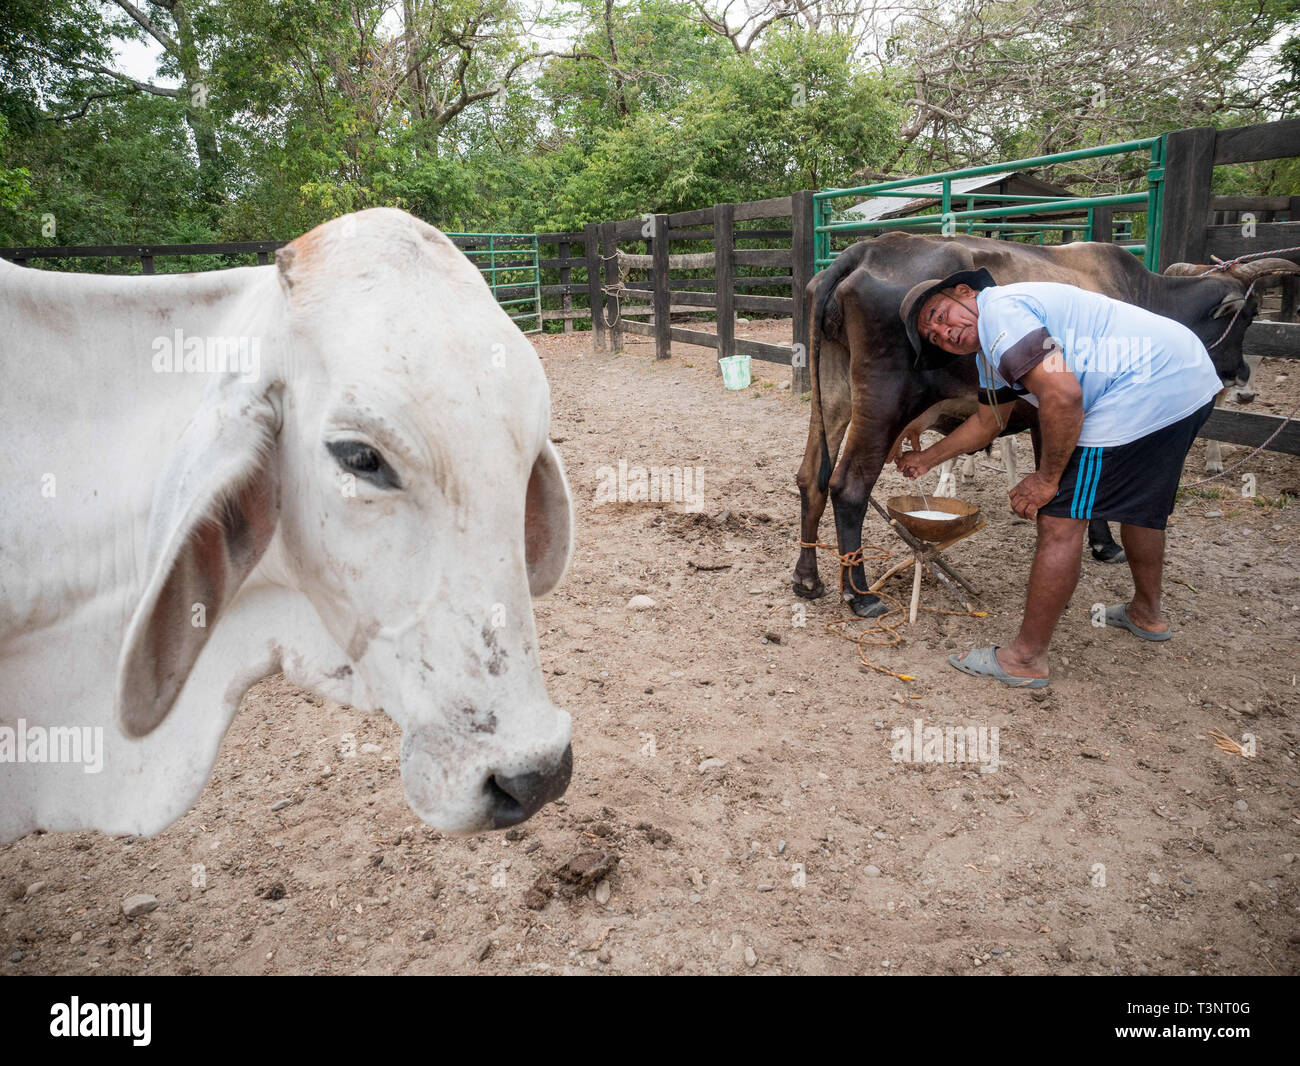 February 9, 2019 - Finca El ParaÃ-So/Yopal, Casanare, Colombia - A cow boy seen milking the cow.Colombian cowboys taking care of the cows in the region of Casanare, eastern Colombia, between the Ands, the Orinoco River and the border with Venezuela. These are Plains and pastures with wide rivers and marshes, a region of big biodiversity. But nowadays, it is in danger because of climate change. Credit: Jana Cavojska/SOPA Images/ZUMA Wire/Alamy Live News Stock Photo